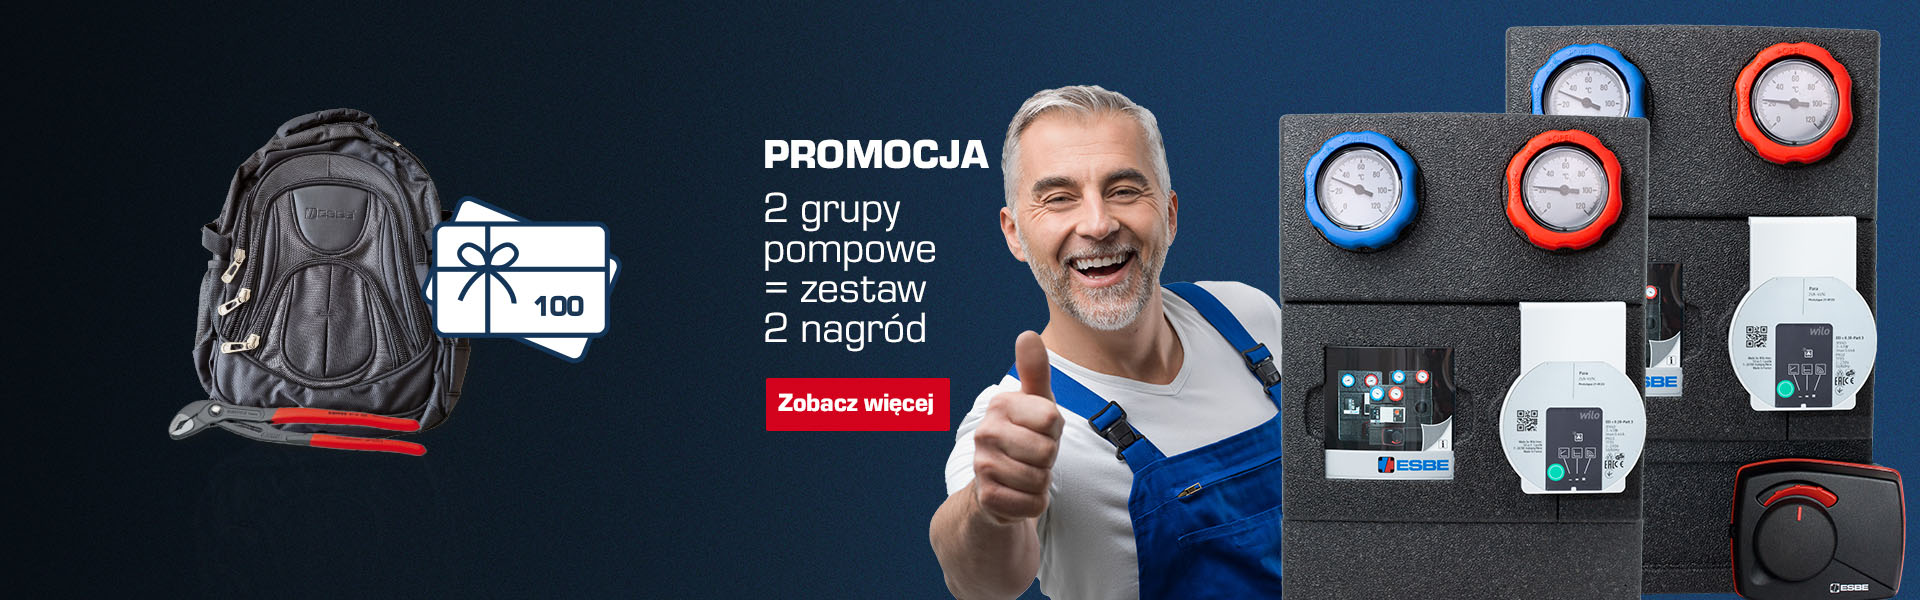 Banner_PL promotion_March_1920x600px_vers A.jpg